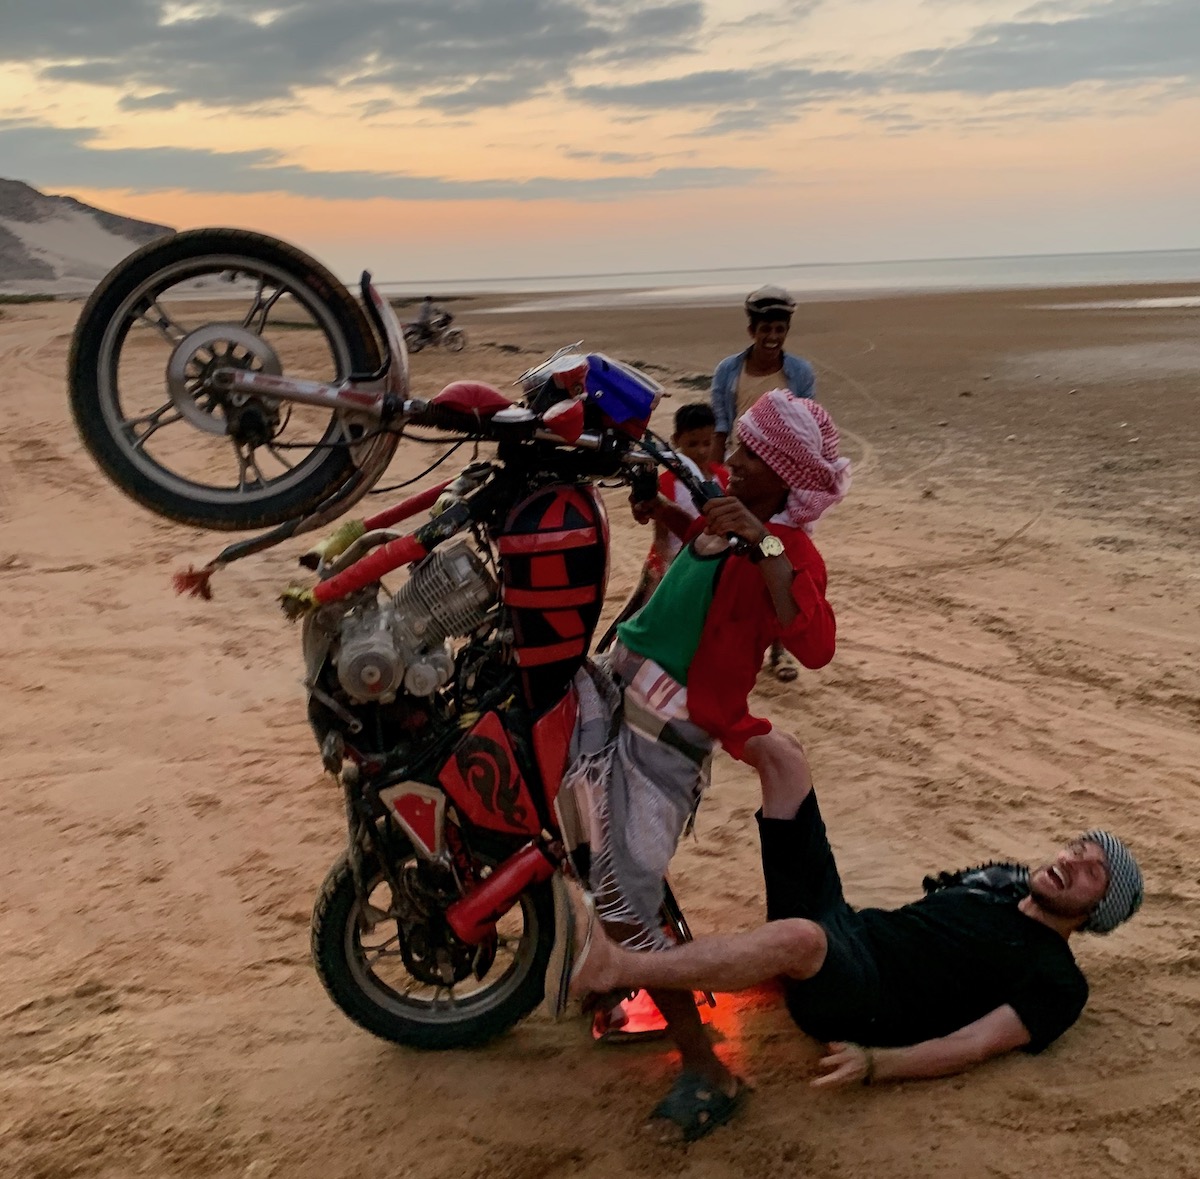 A tourist laughs as he falls off a young man's motorbike in Socotra Island, Yemen